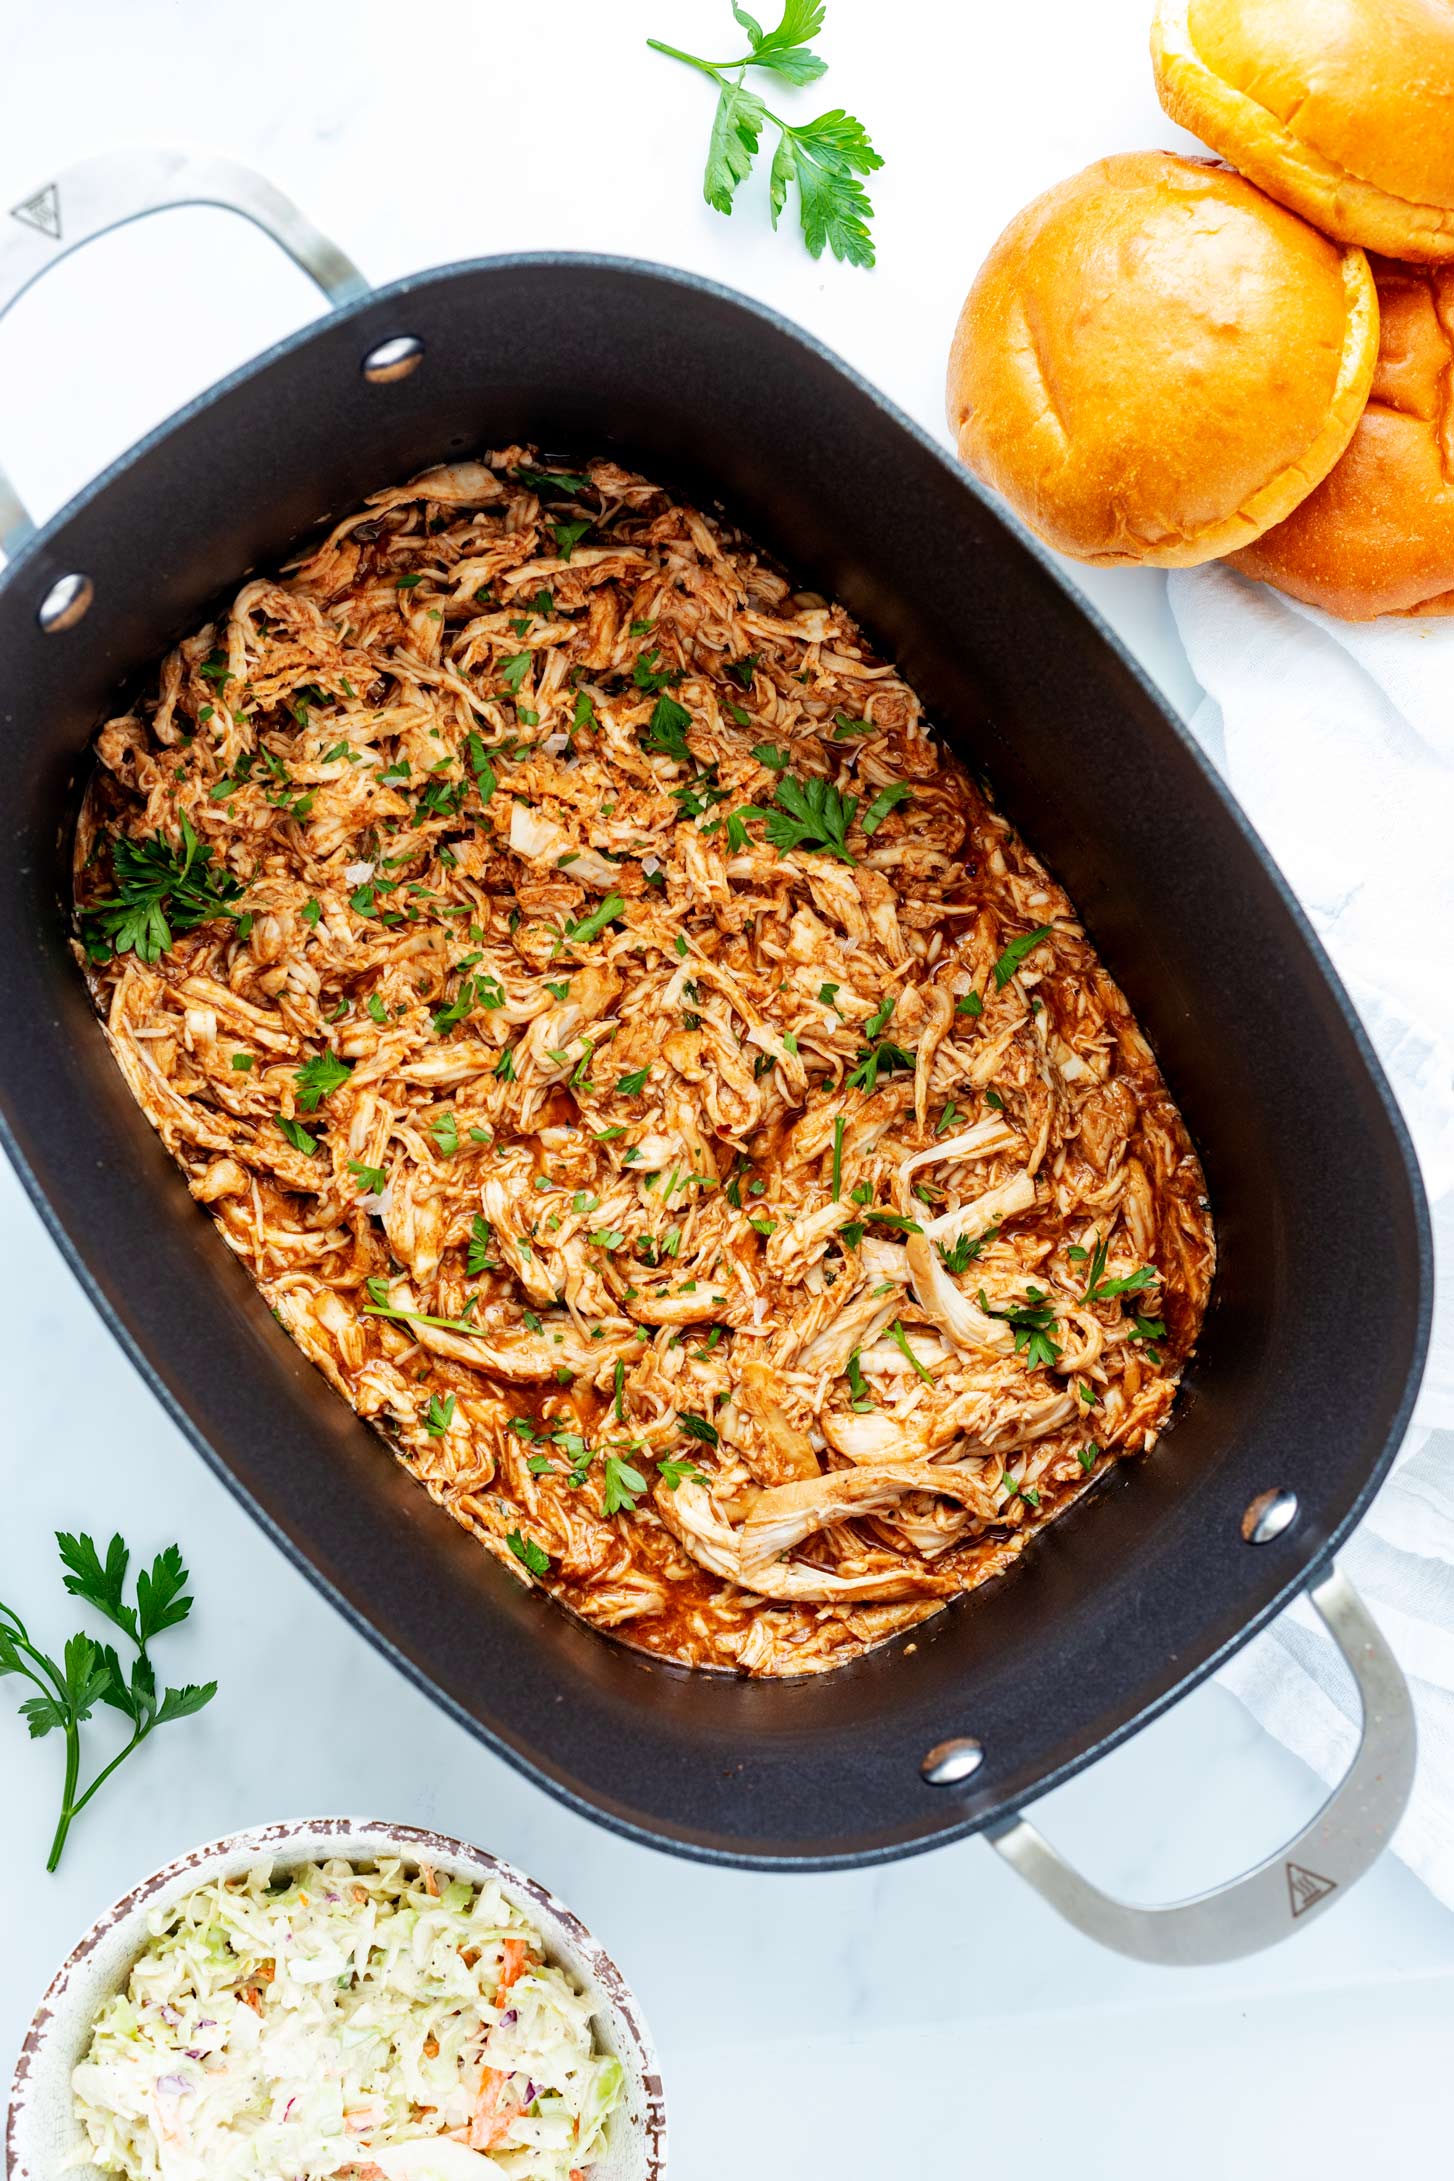 Overhead photo of a slow cooker with shredded BBQ chicken in it.